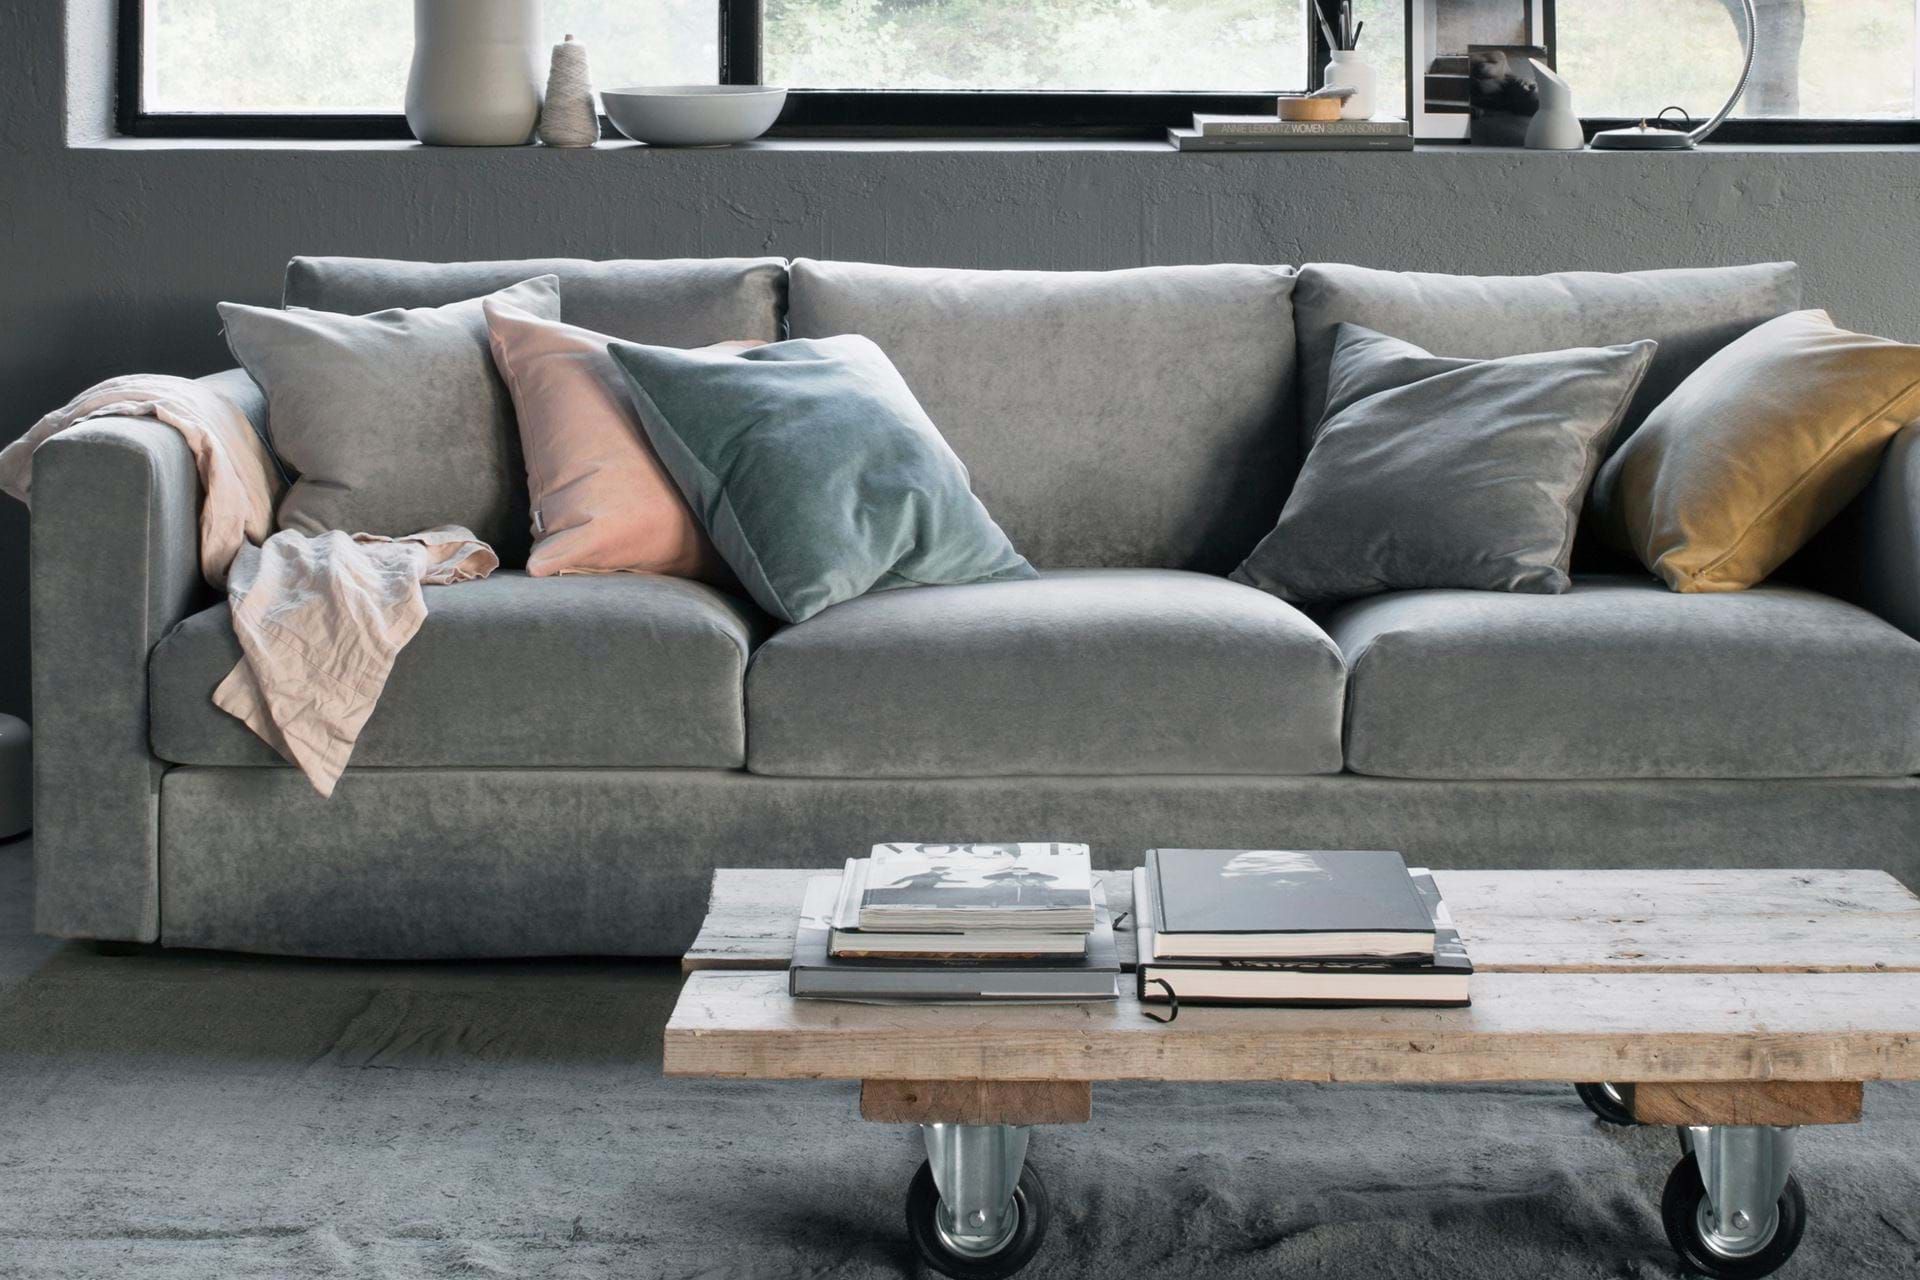 IKEA Vimle sofa review and why we love it | Bemz